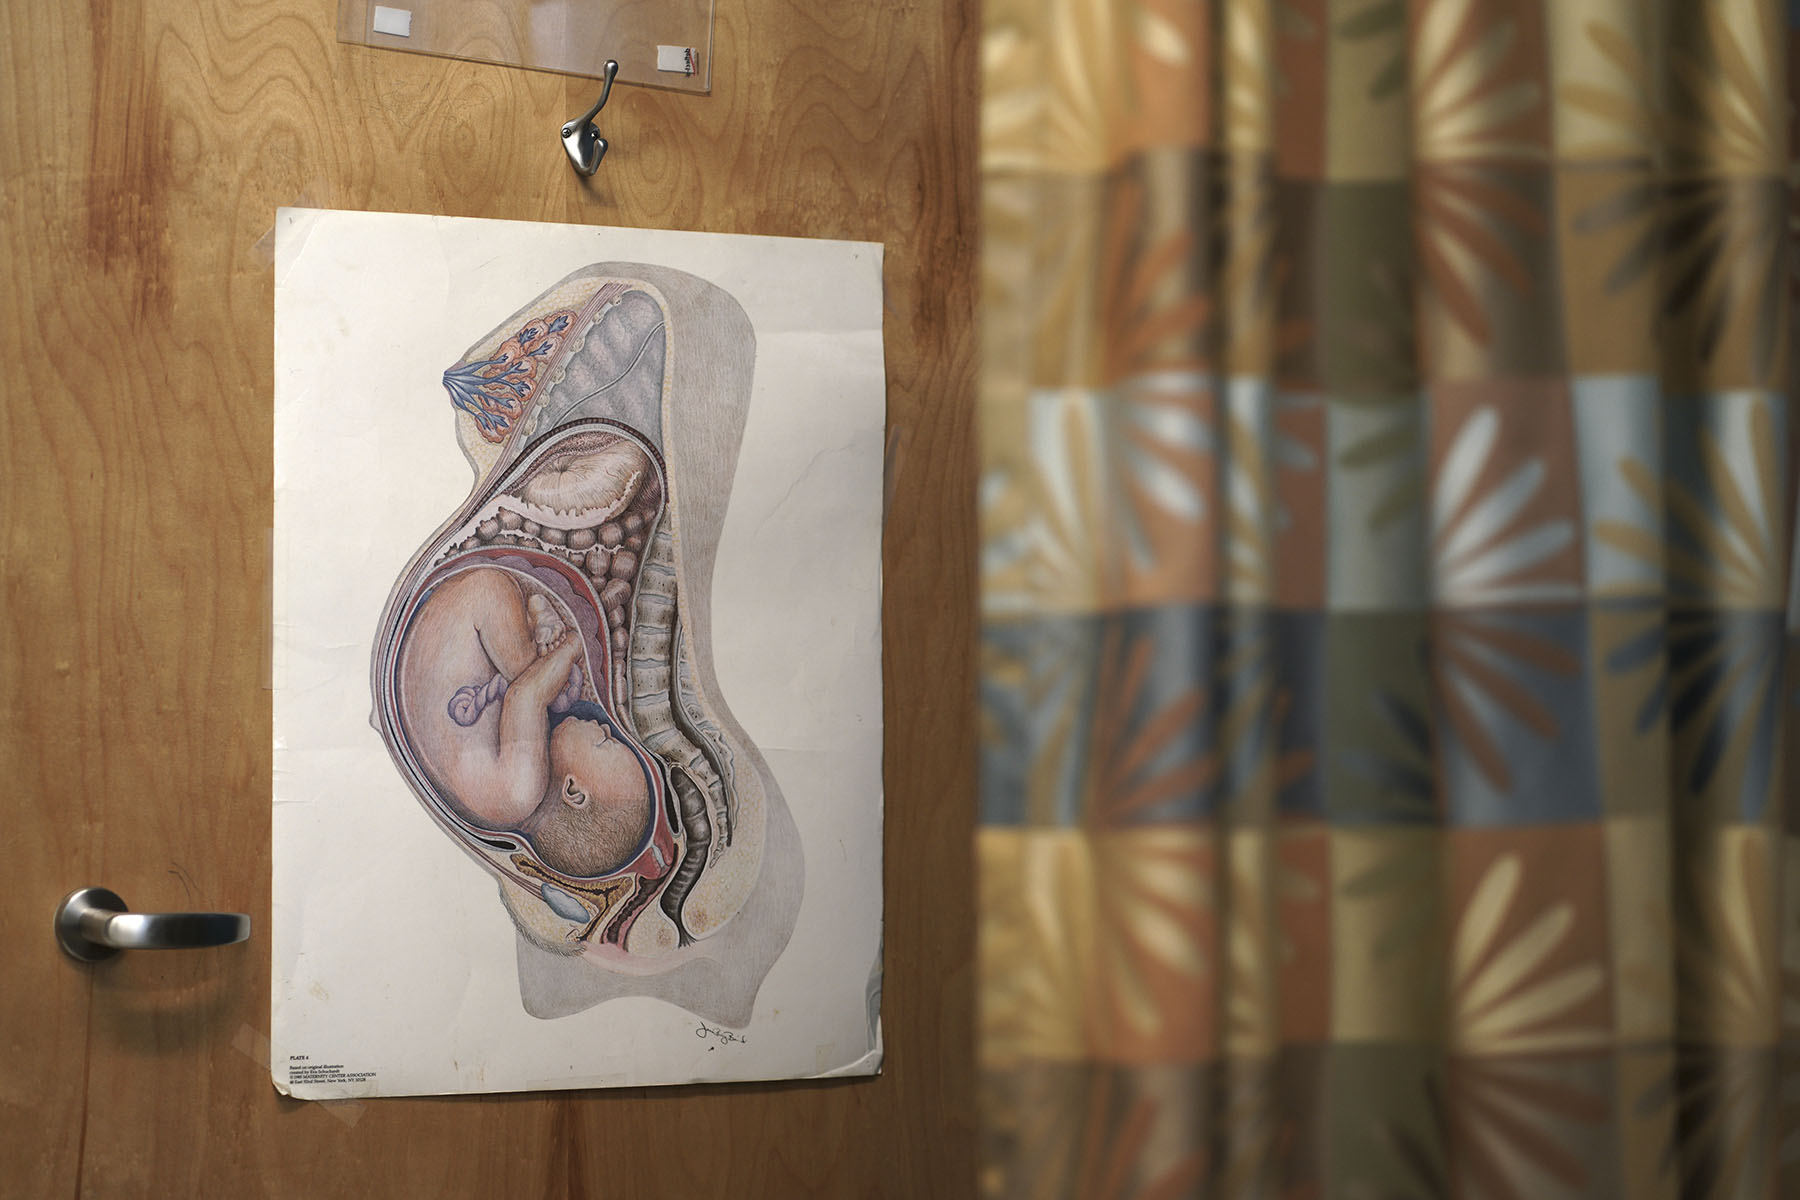 A medical poster showing a baby in the womb hangs in an examination room.